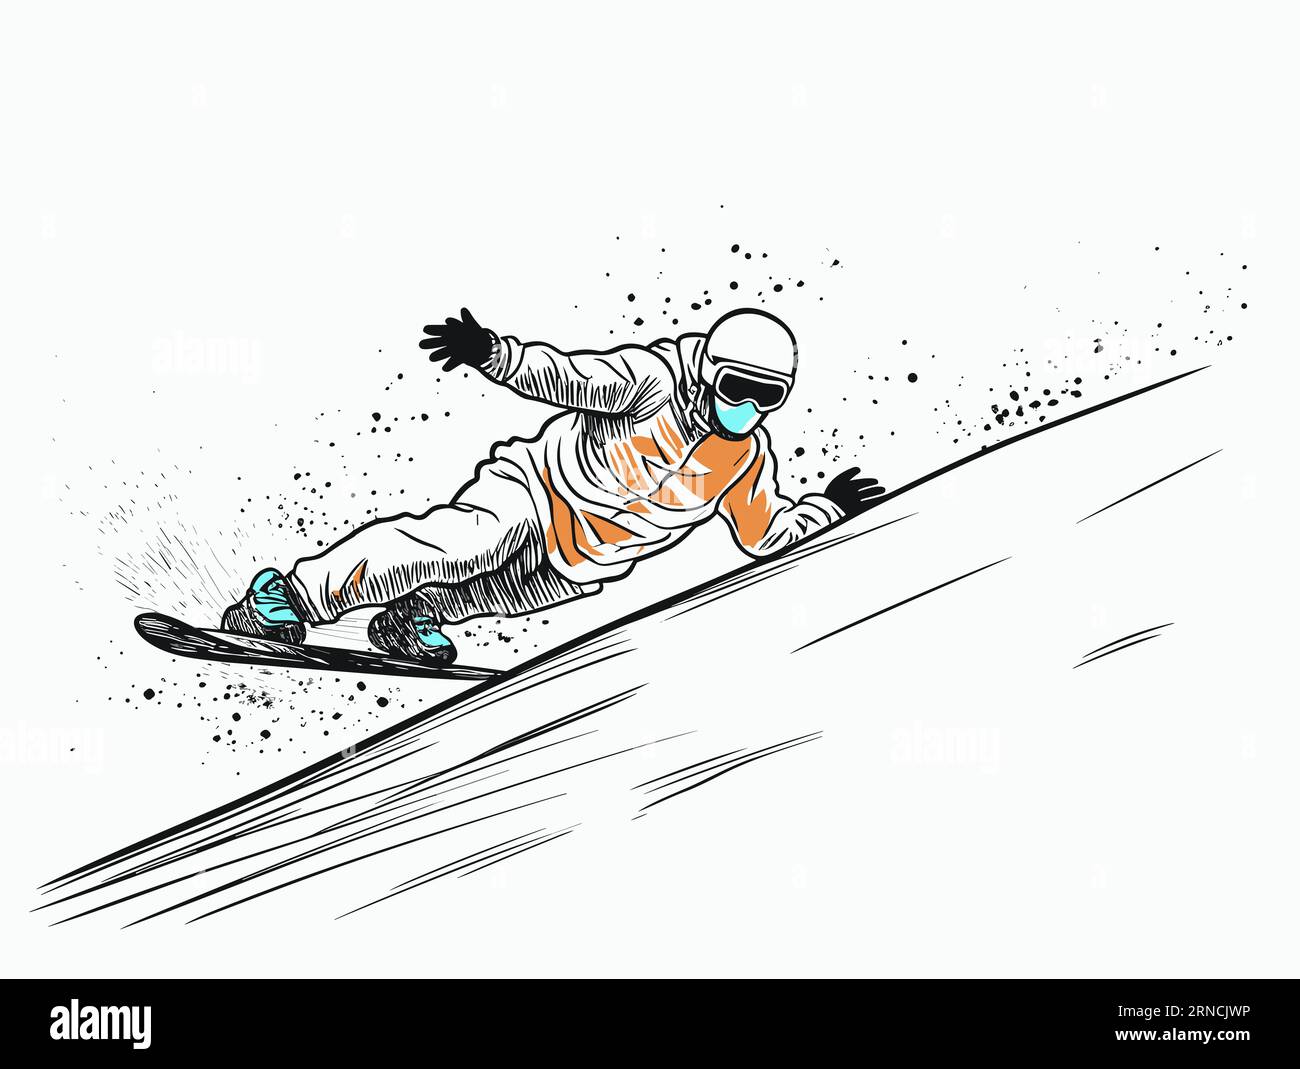 A Line Drawing Of A Snowboarder Going Down A Hill, In The Style Of White And Amber, High Speed Sync, Kimoicore, High-Angle, Grit And Grain, Performanc Stock Vector